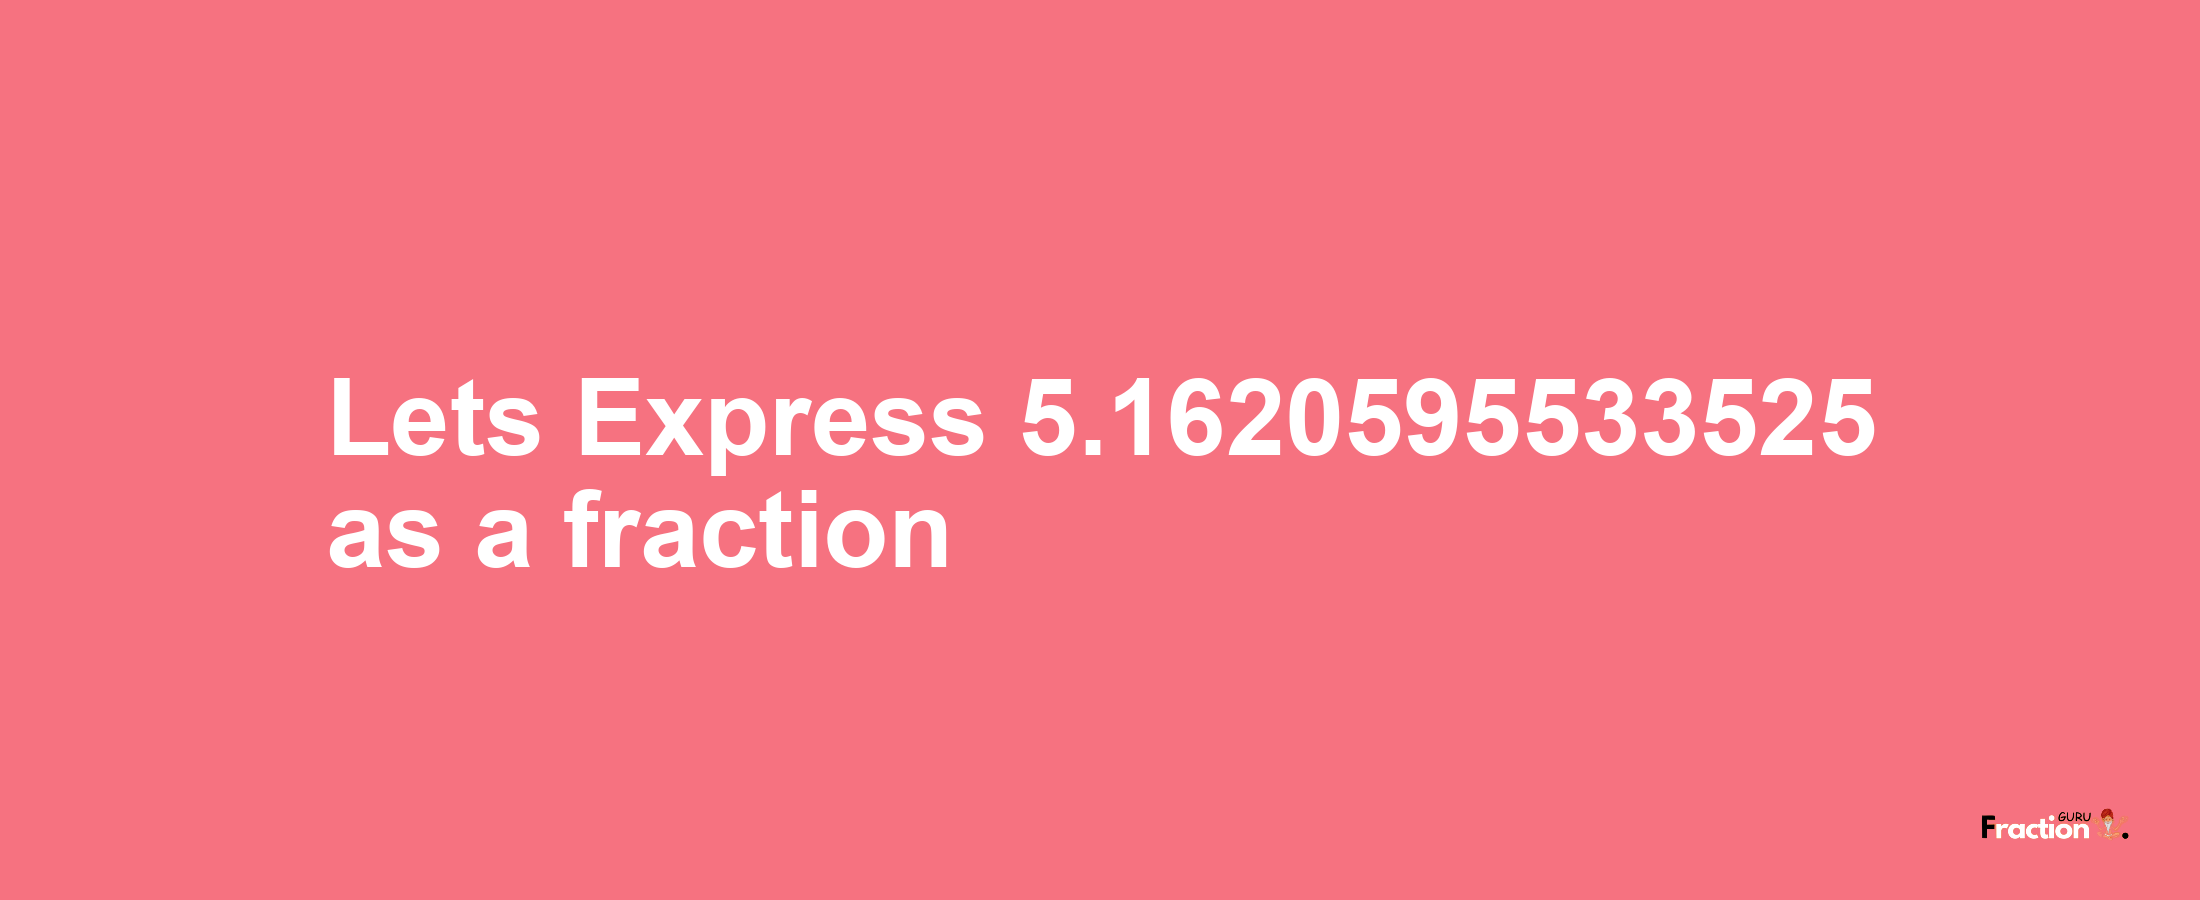 Lets Express 5.1620595533525 as afraction